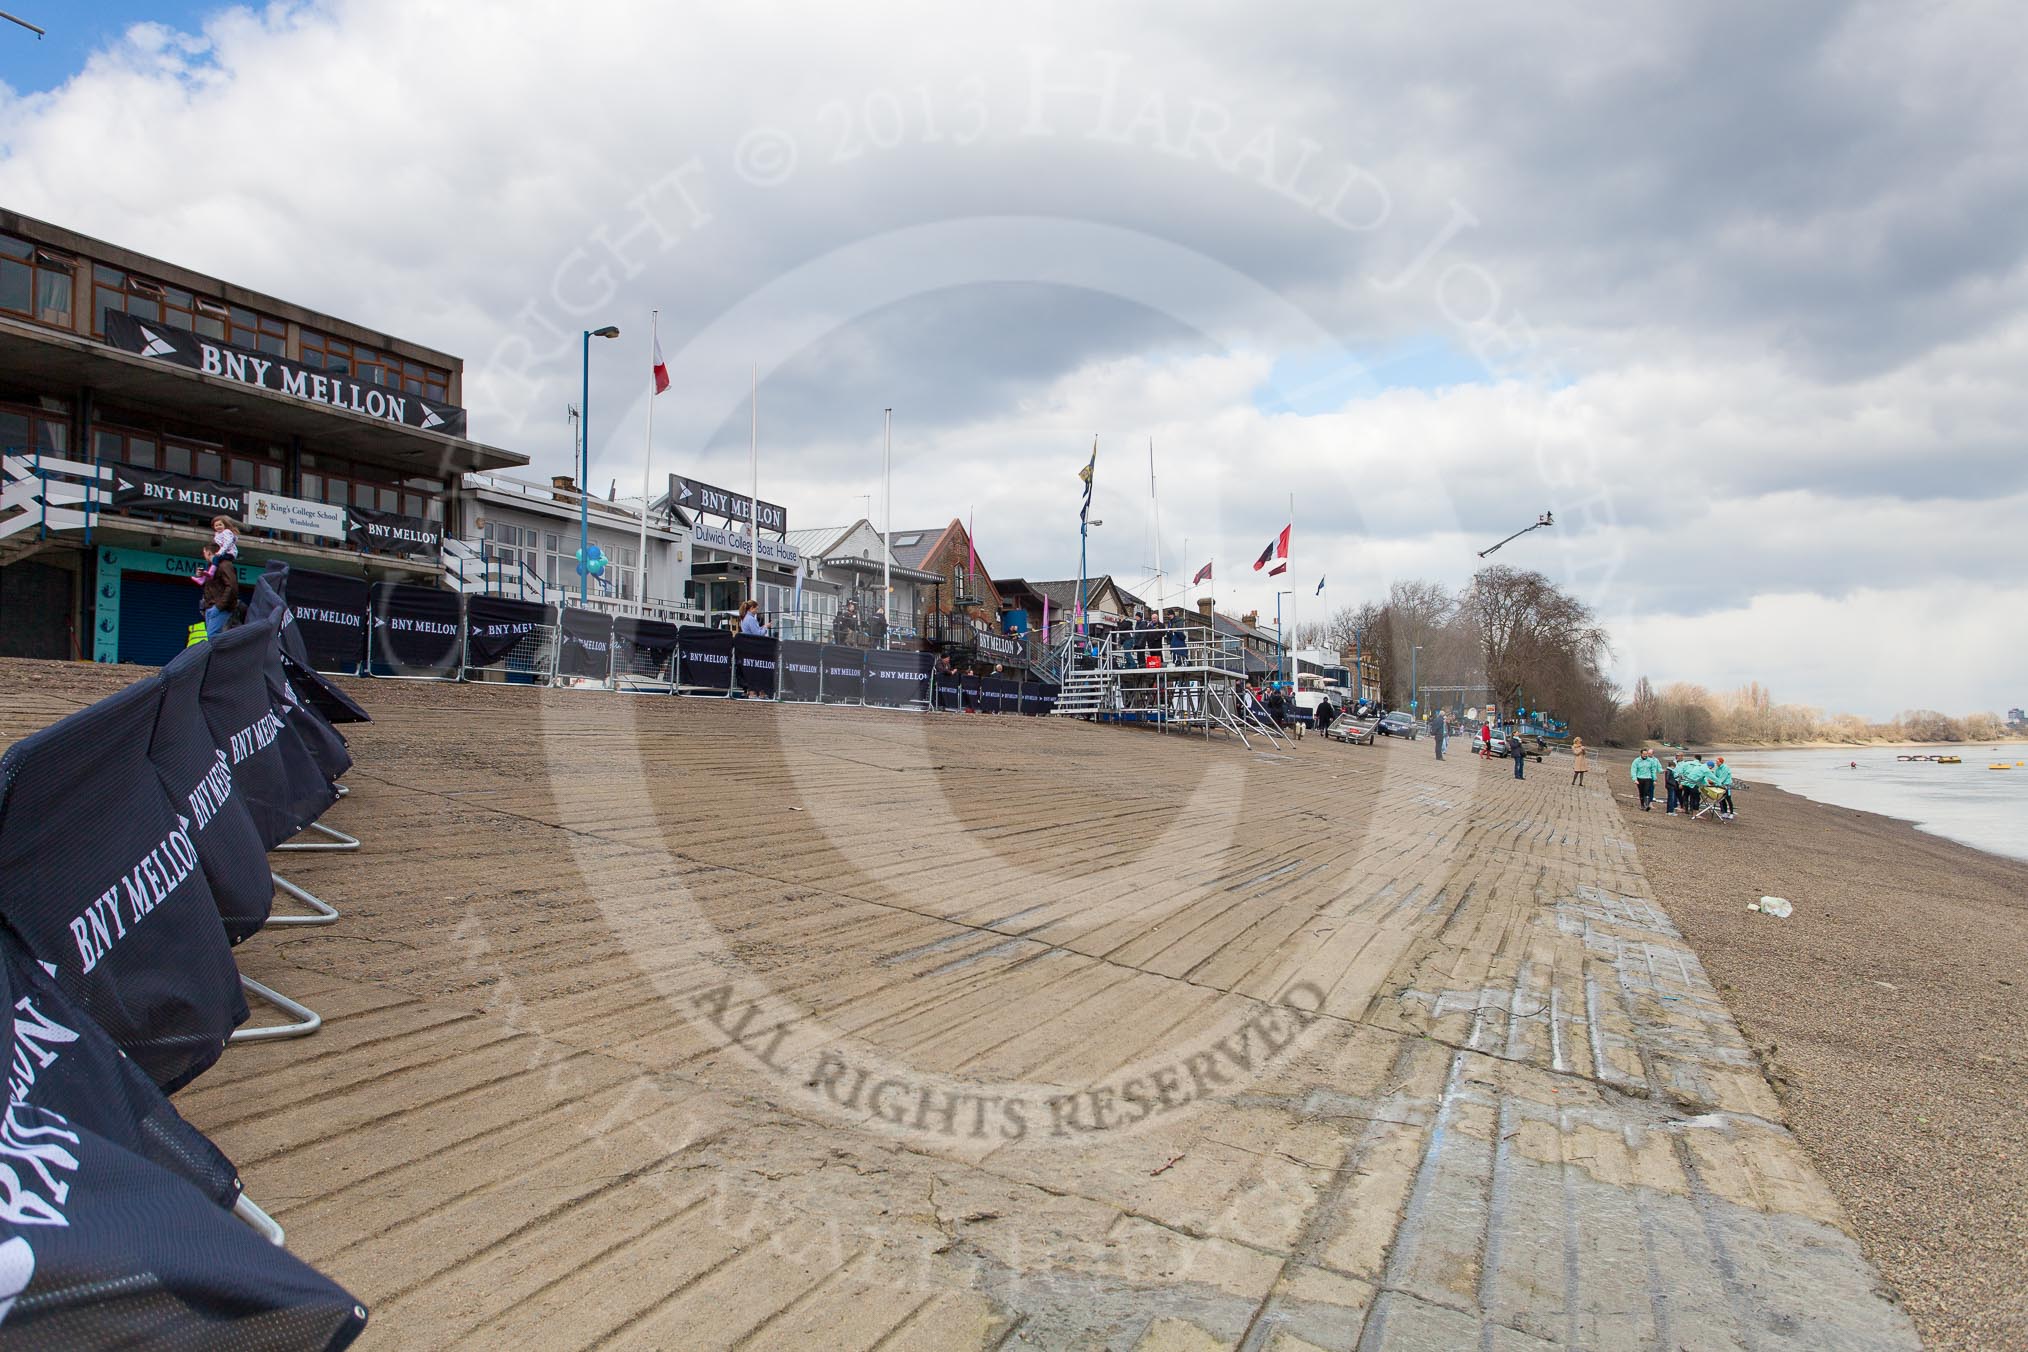 The Boat Race 2013: Barriers covered with logos of the Boat Race sponsor BNY Mellon, in the centre of the image a platform that will be used by the BBC for interviews and commentary..
Putney,
London SW15,

United Kingdom,
on 31 March 2013 at 11:12, image #9